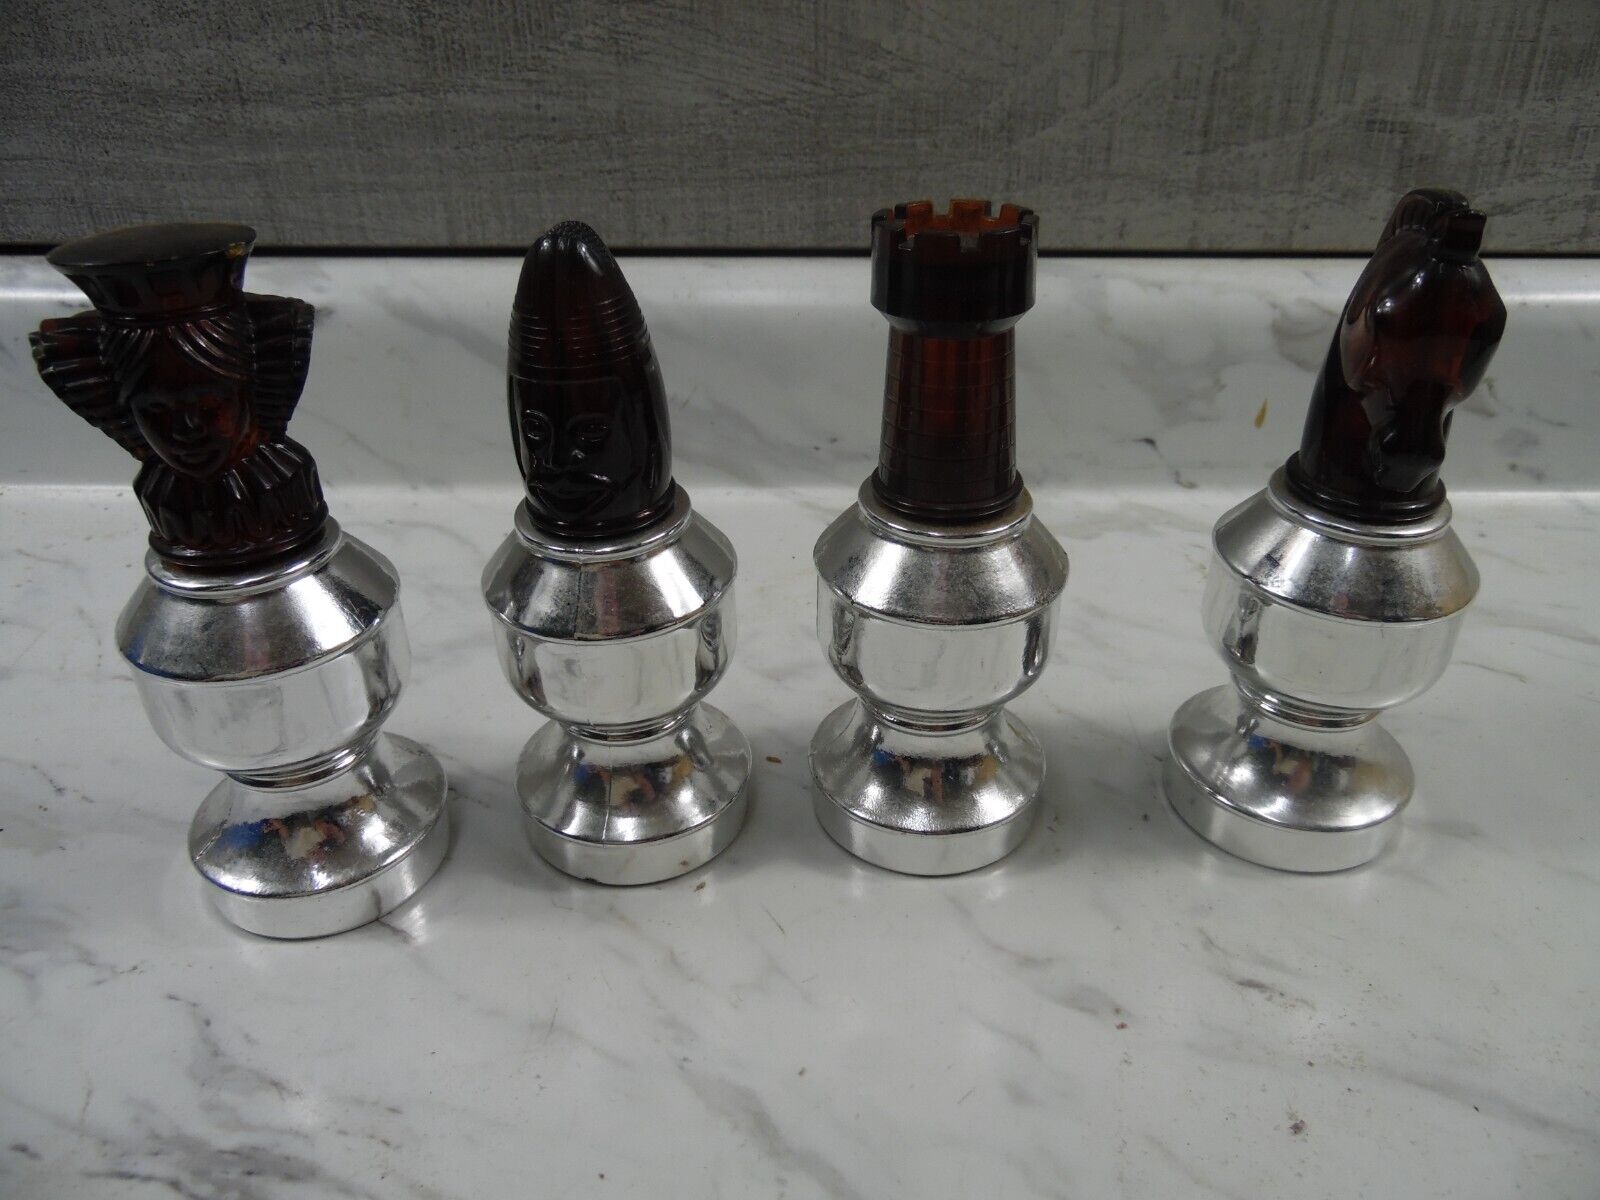 🎆Vintage Avon Chess Set Pieces Cologne After Shave Lot Of 4 empty bottles🎆